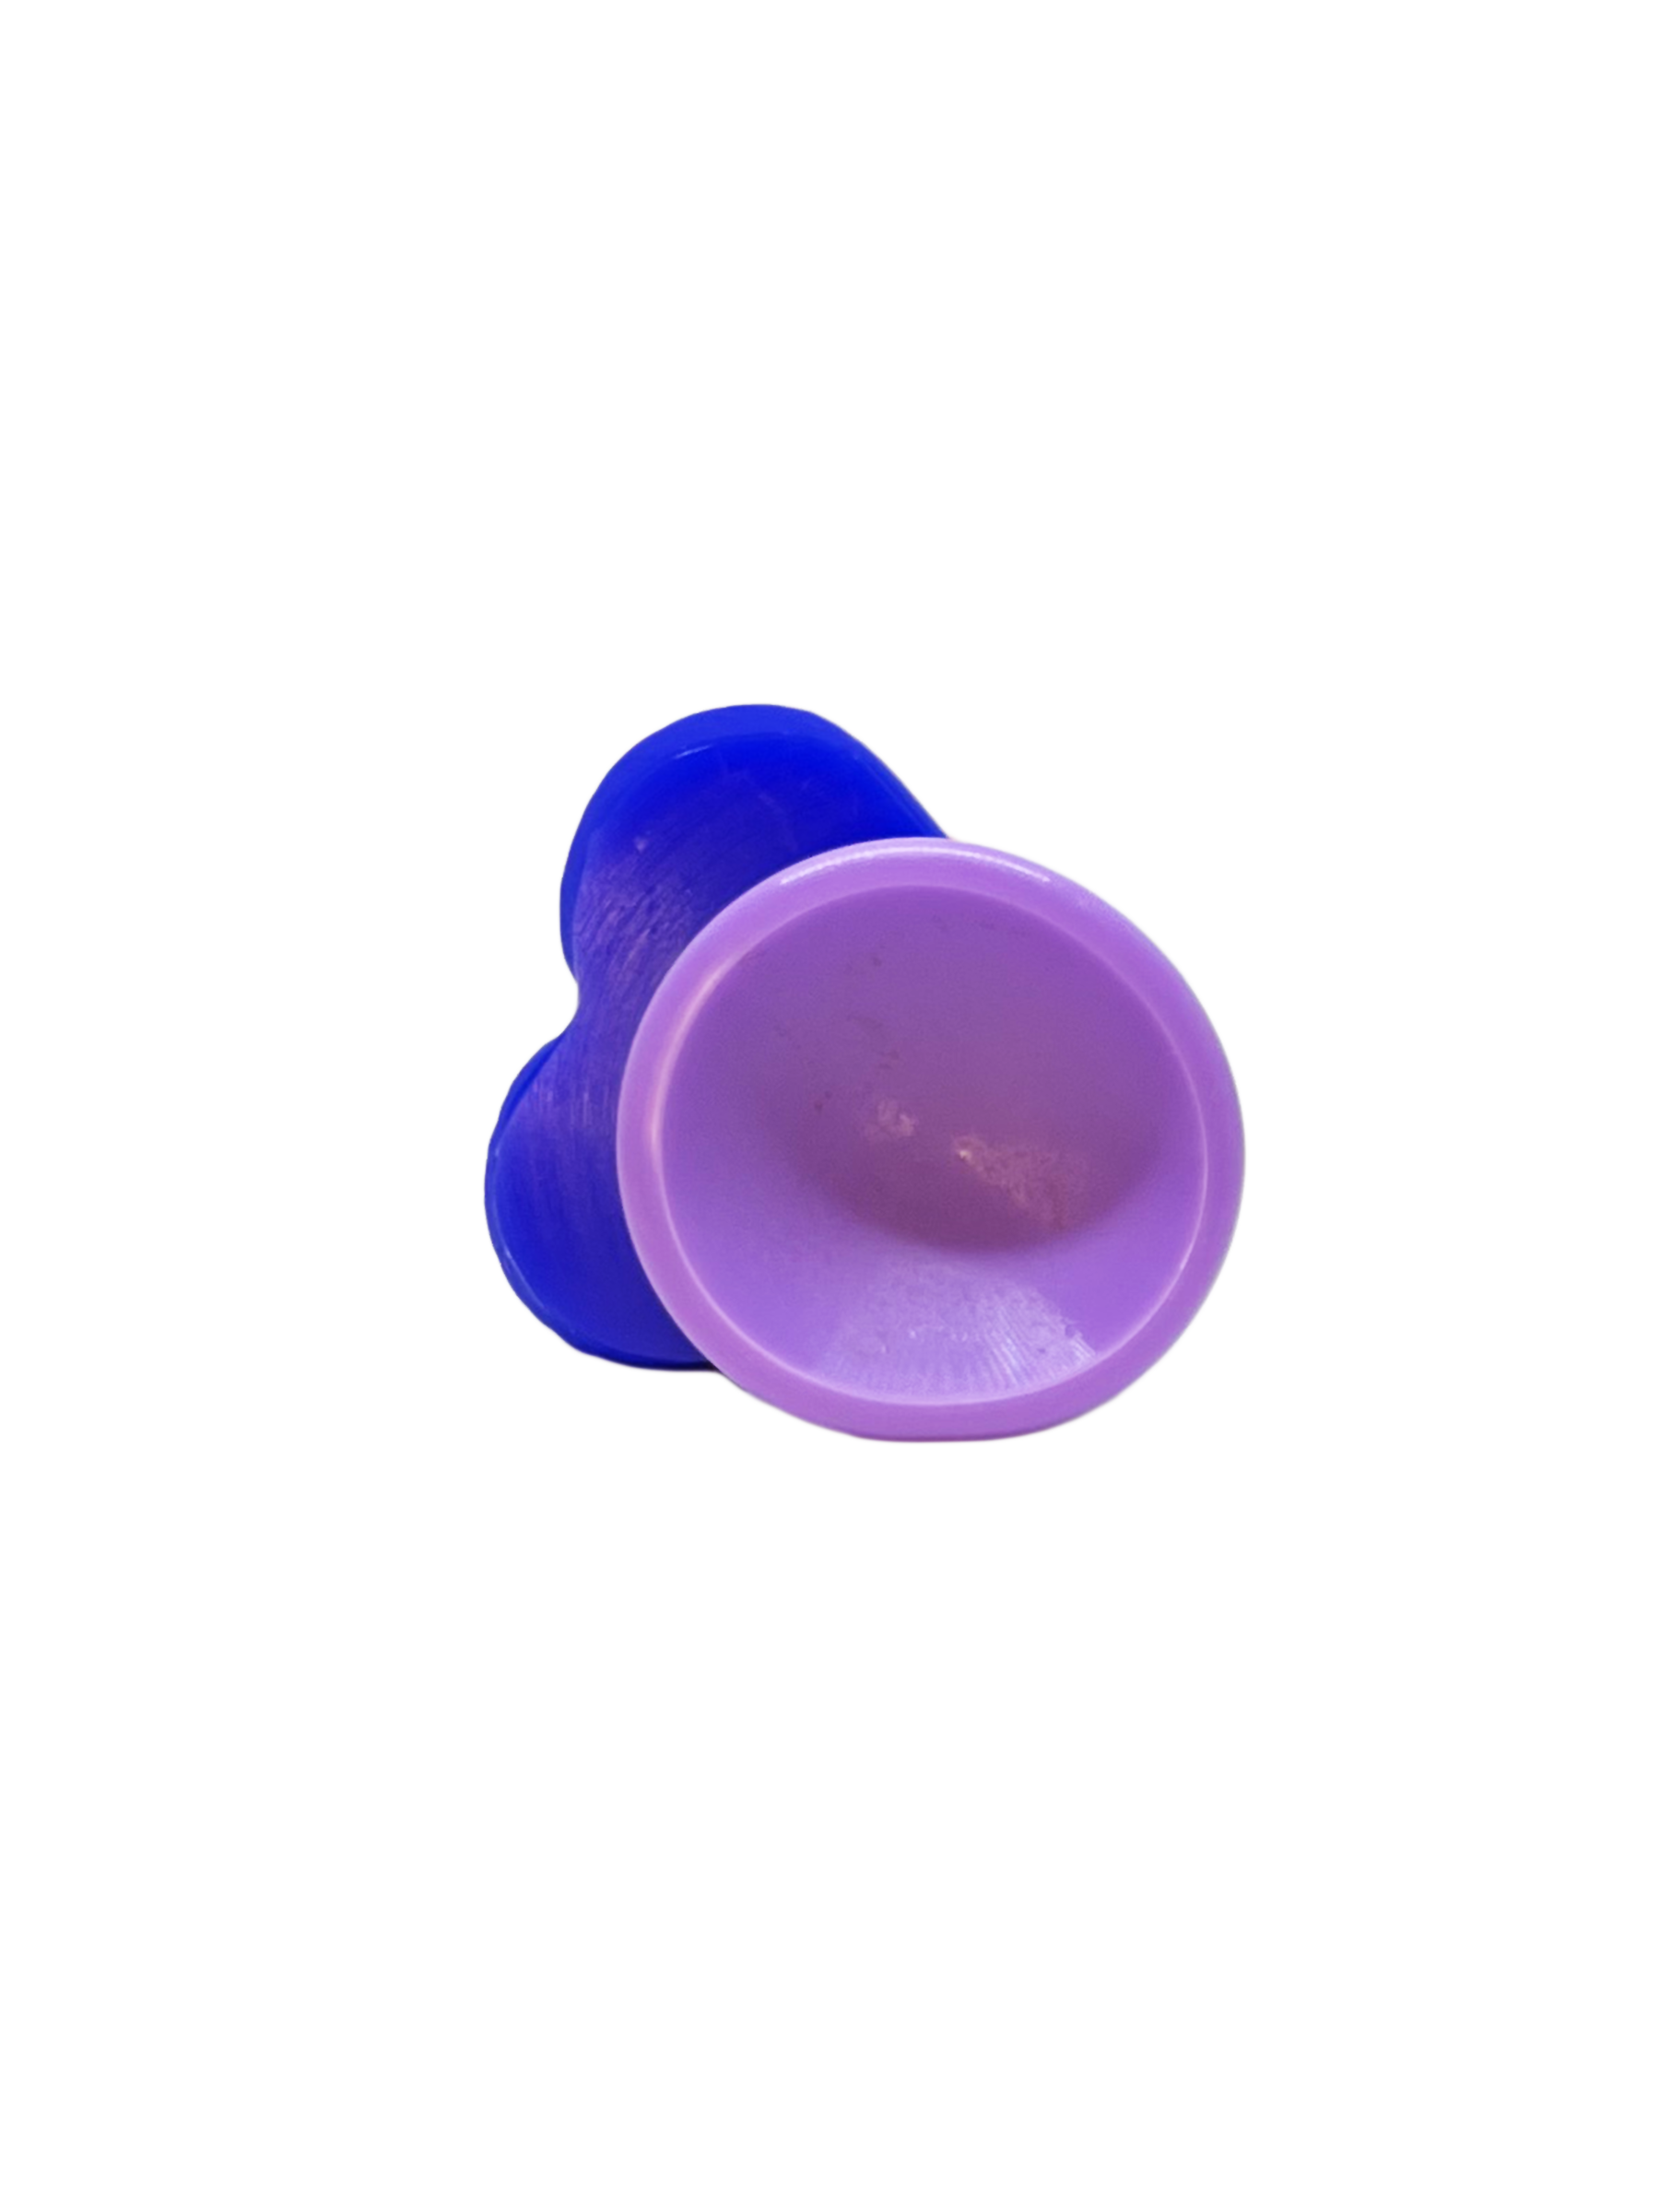 Another Gay Rainbow Dildo suction cup base